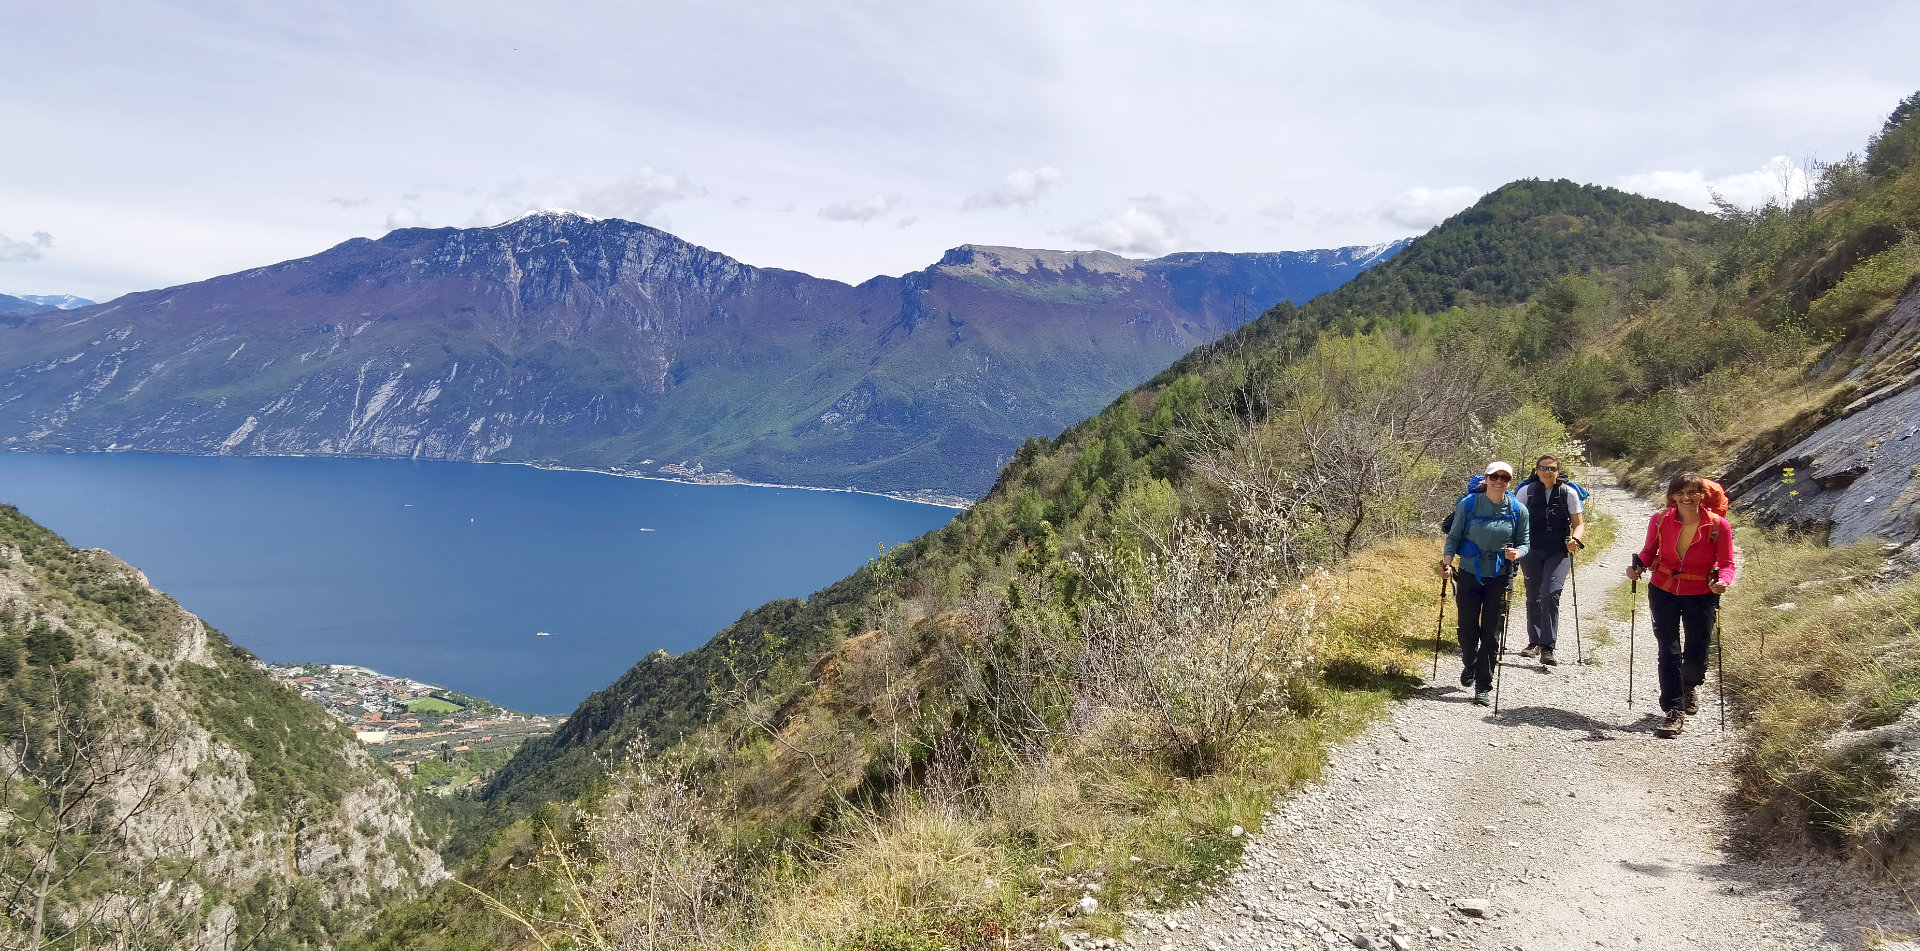 High-altitude trails overlooking the lake